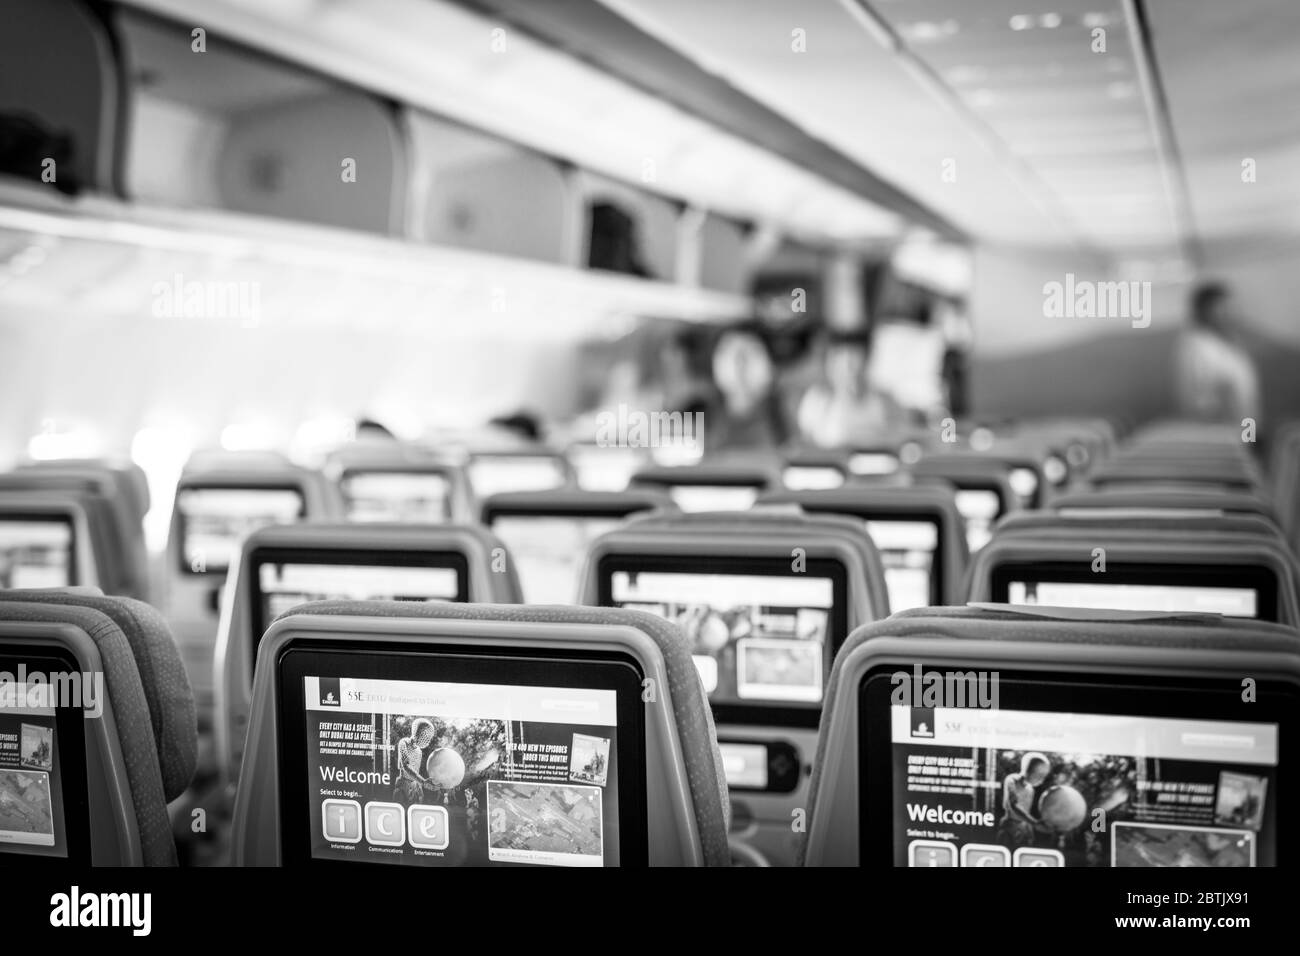 Dubai, UAE - February 13, 2020: Emirates new economy class seats with modern multimedia system and large screens of high resolution and touchscreen Stock Photo